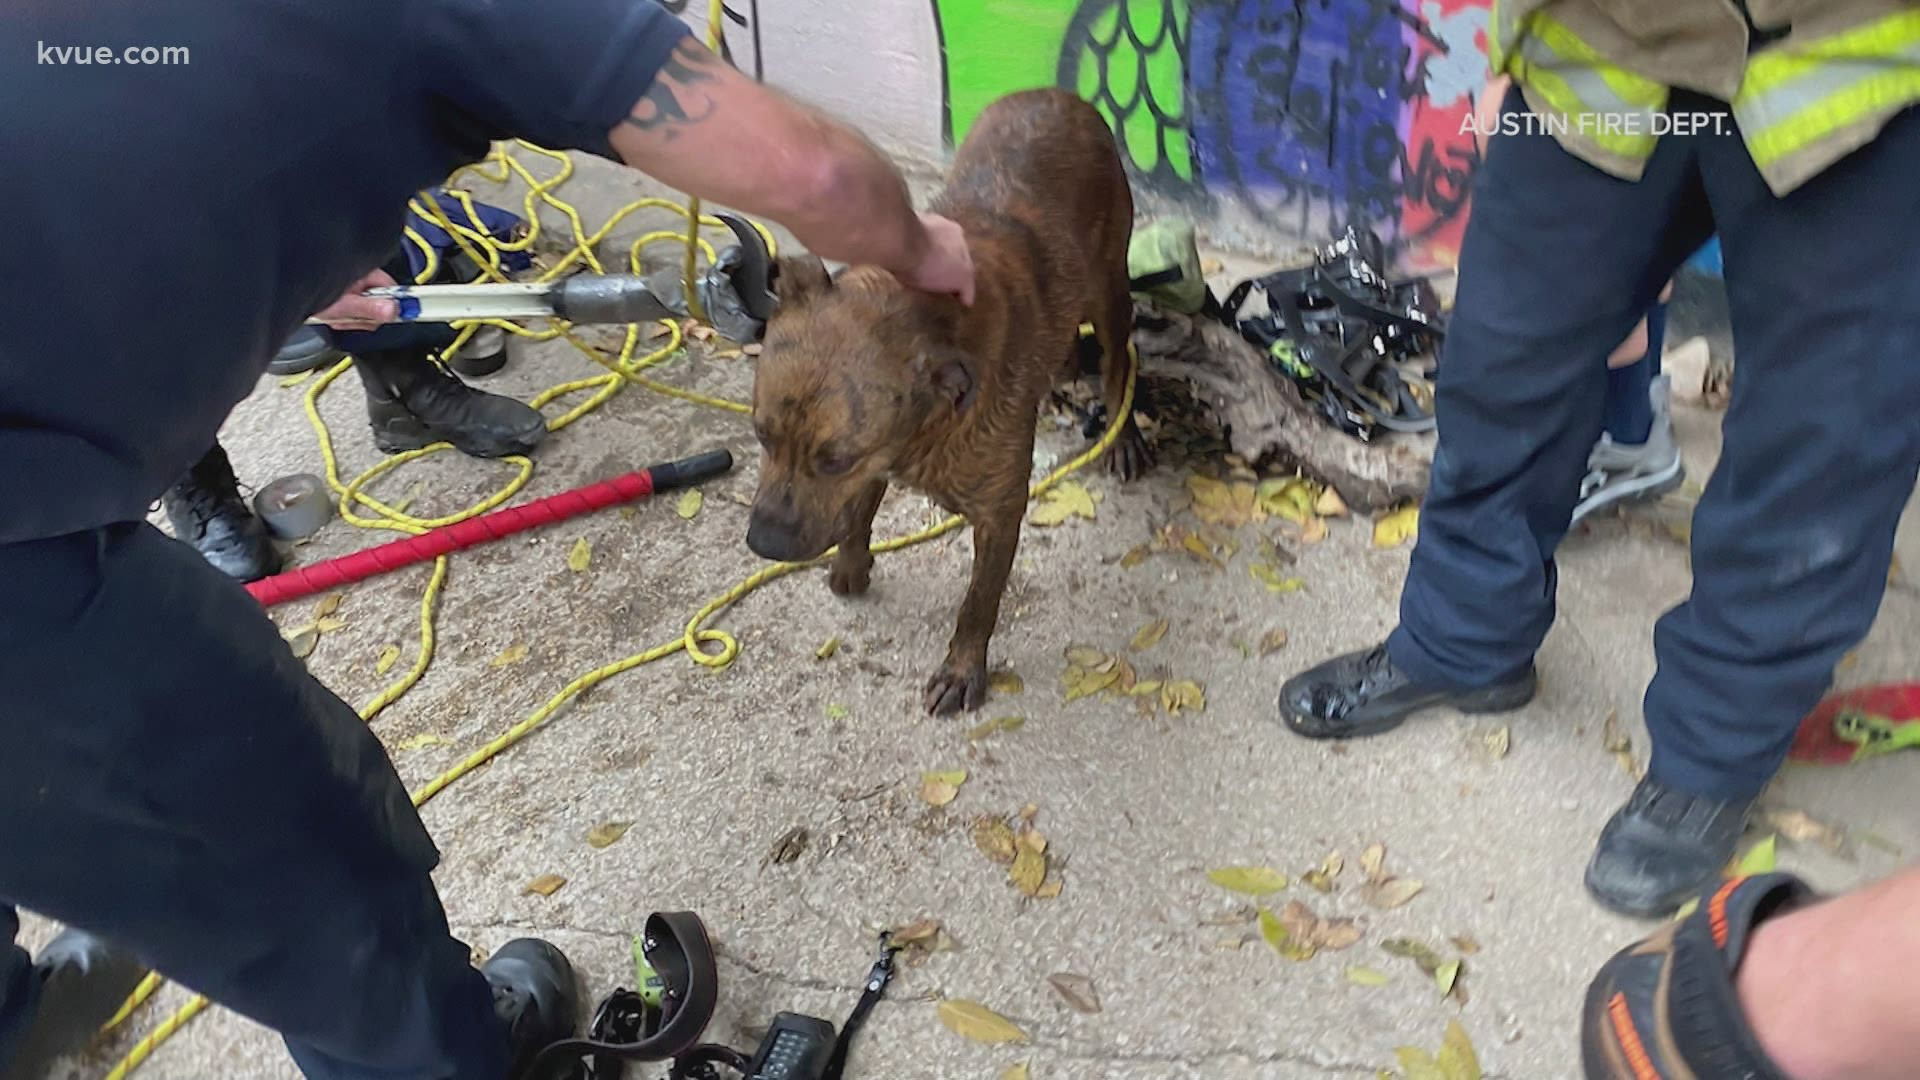 Austin firefighters spent several hours trying to rescue a pup that got stuck under a concrete ledge at Lady Bird Lake.